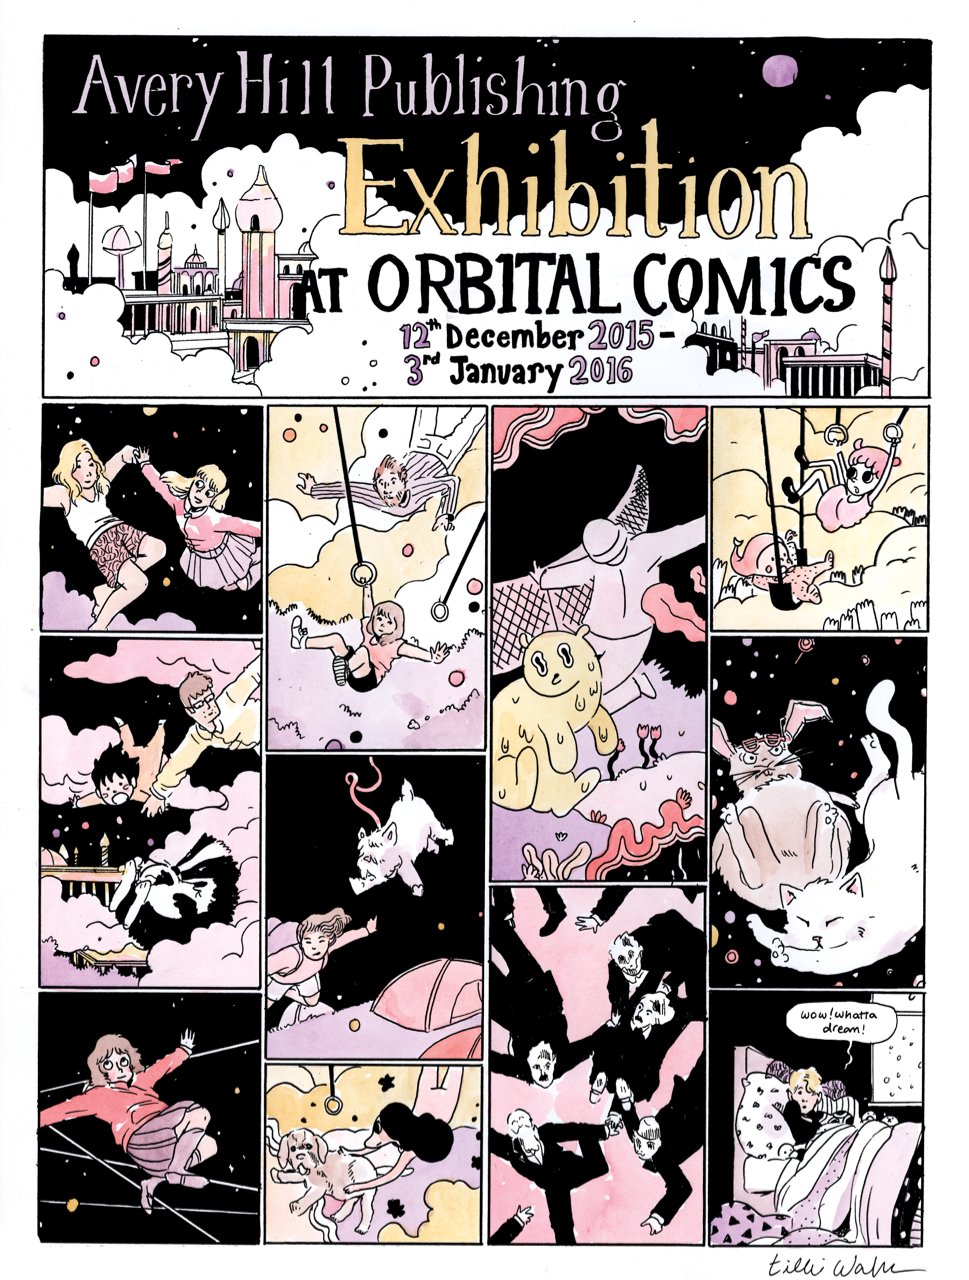 The Avery Hill Exhibition at London's Orbital Comics, on now until January 2016.